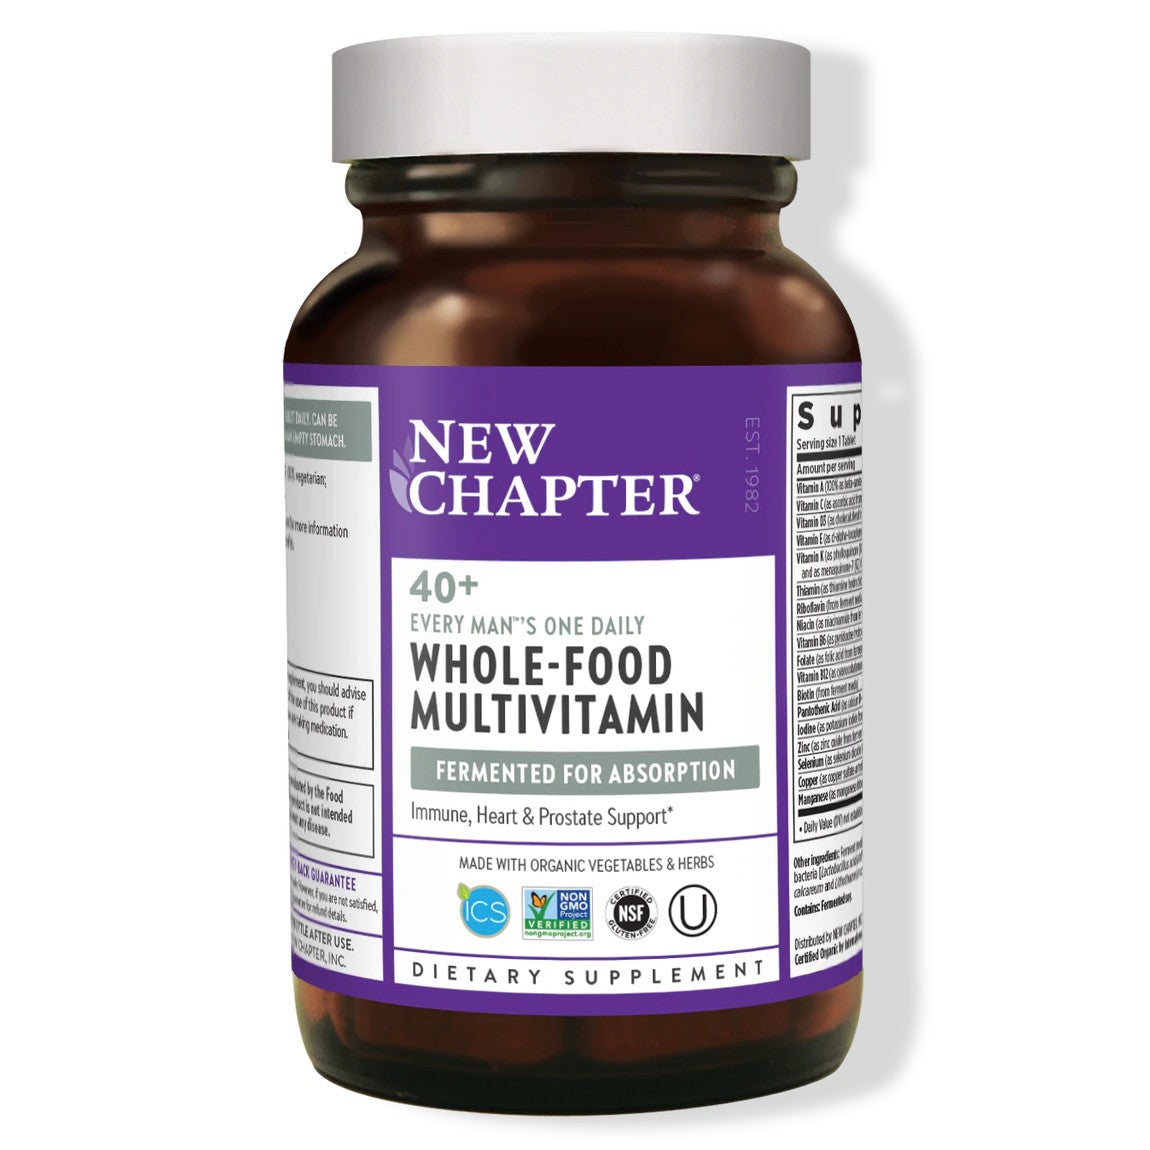 Every Man's One Daily 40+ Multivitamin - My Village Green